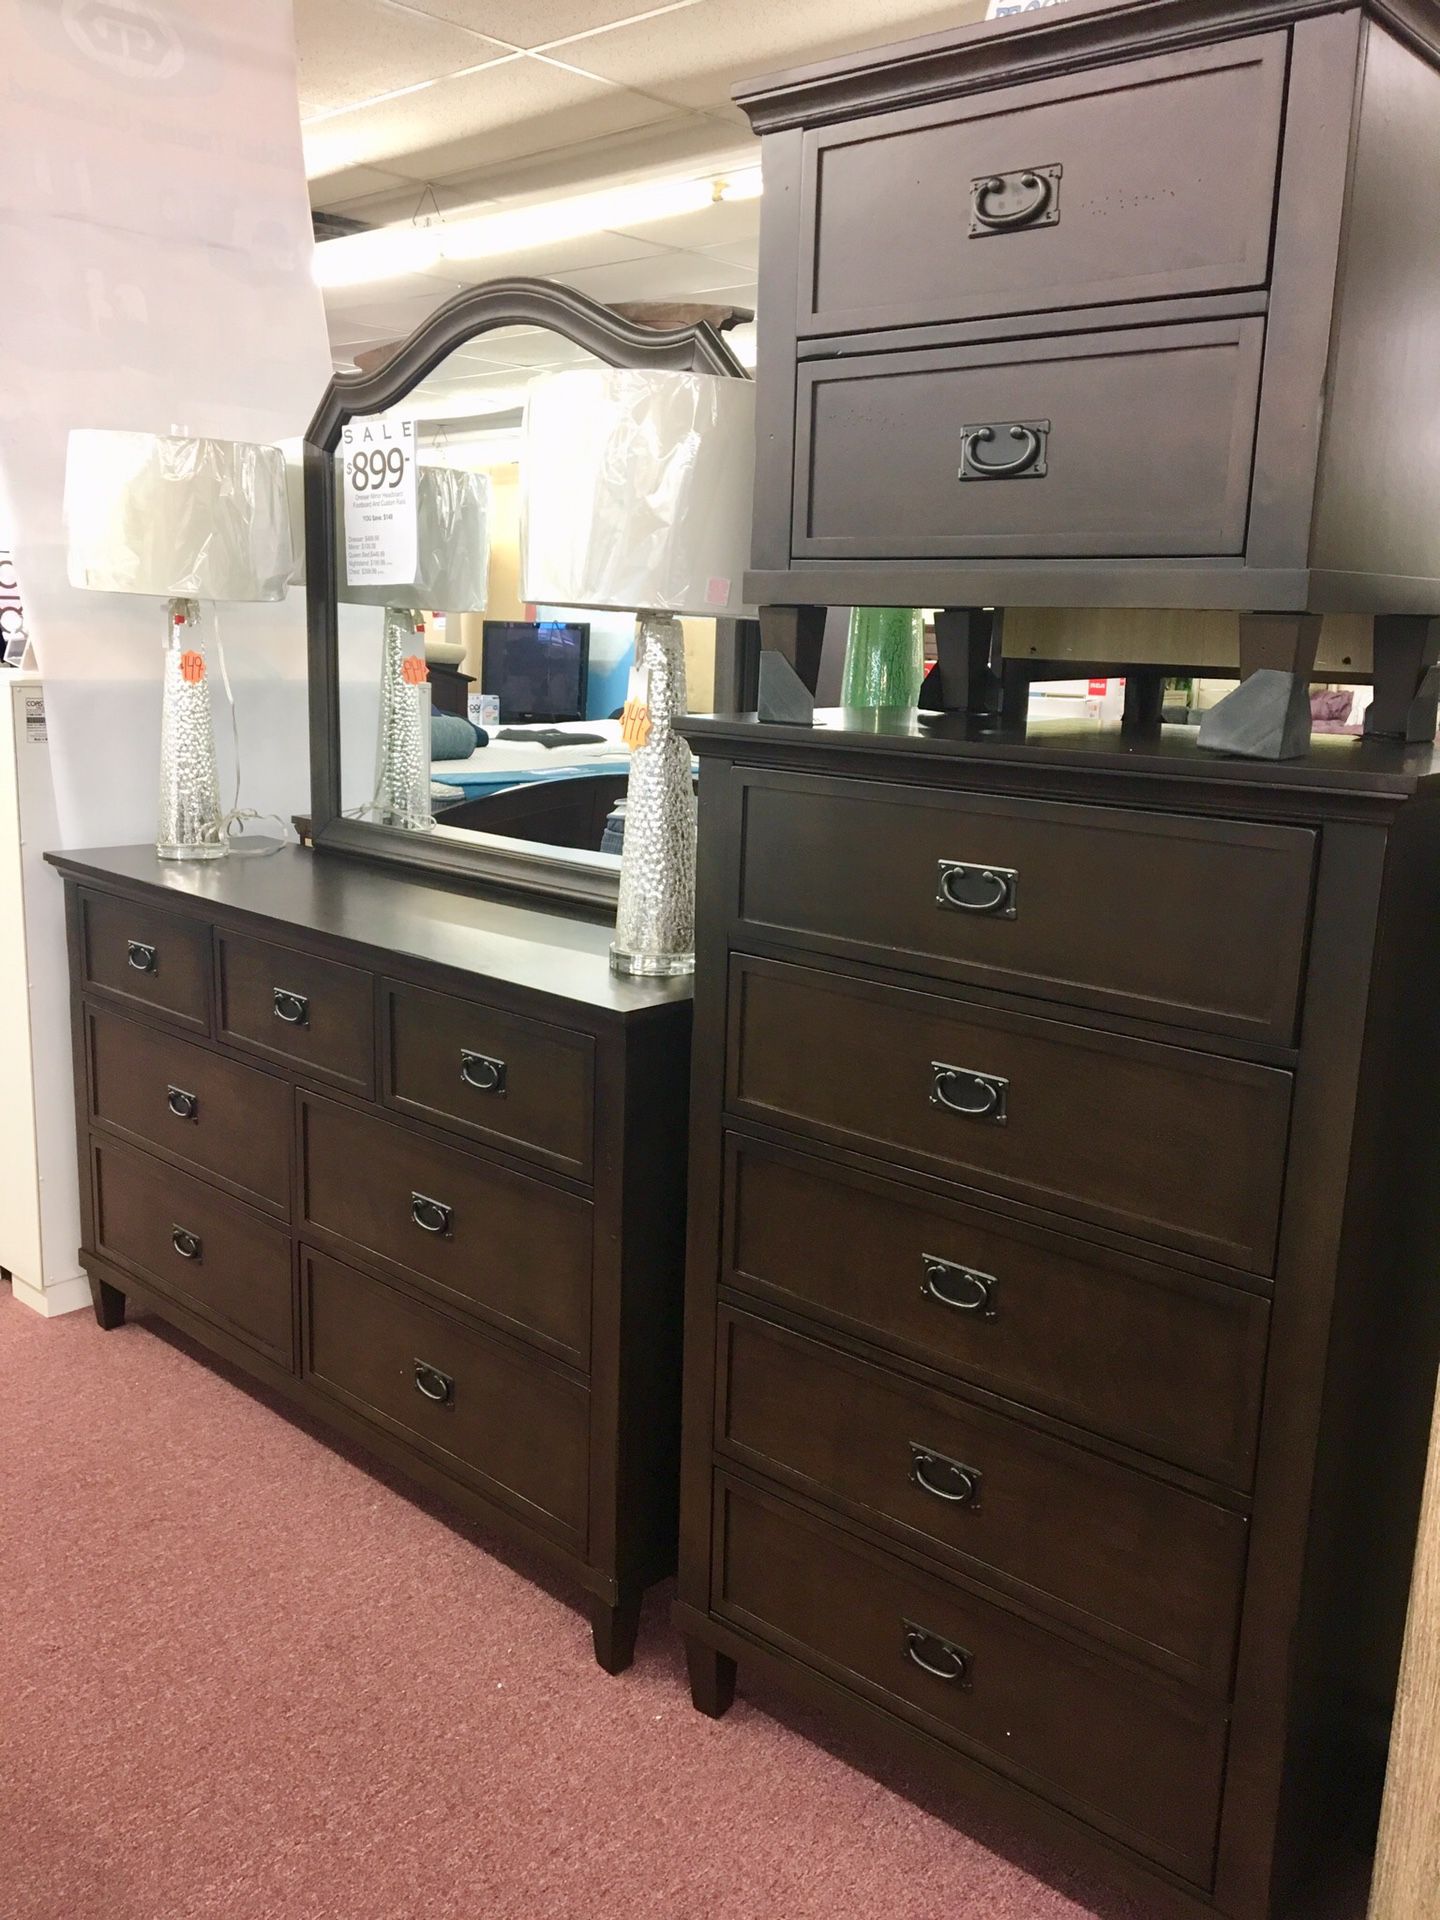 💥HUGE Furniture Sale!💥 Brand New 5PC Queen Size Bedroom Set! $50 Down Takes It Home Today!